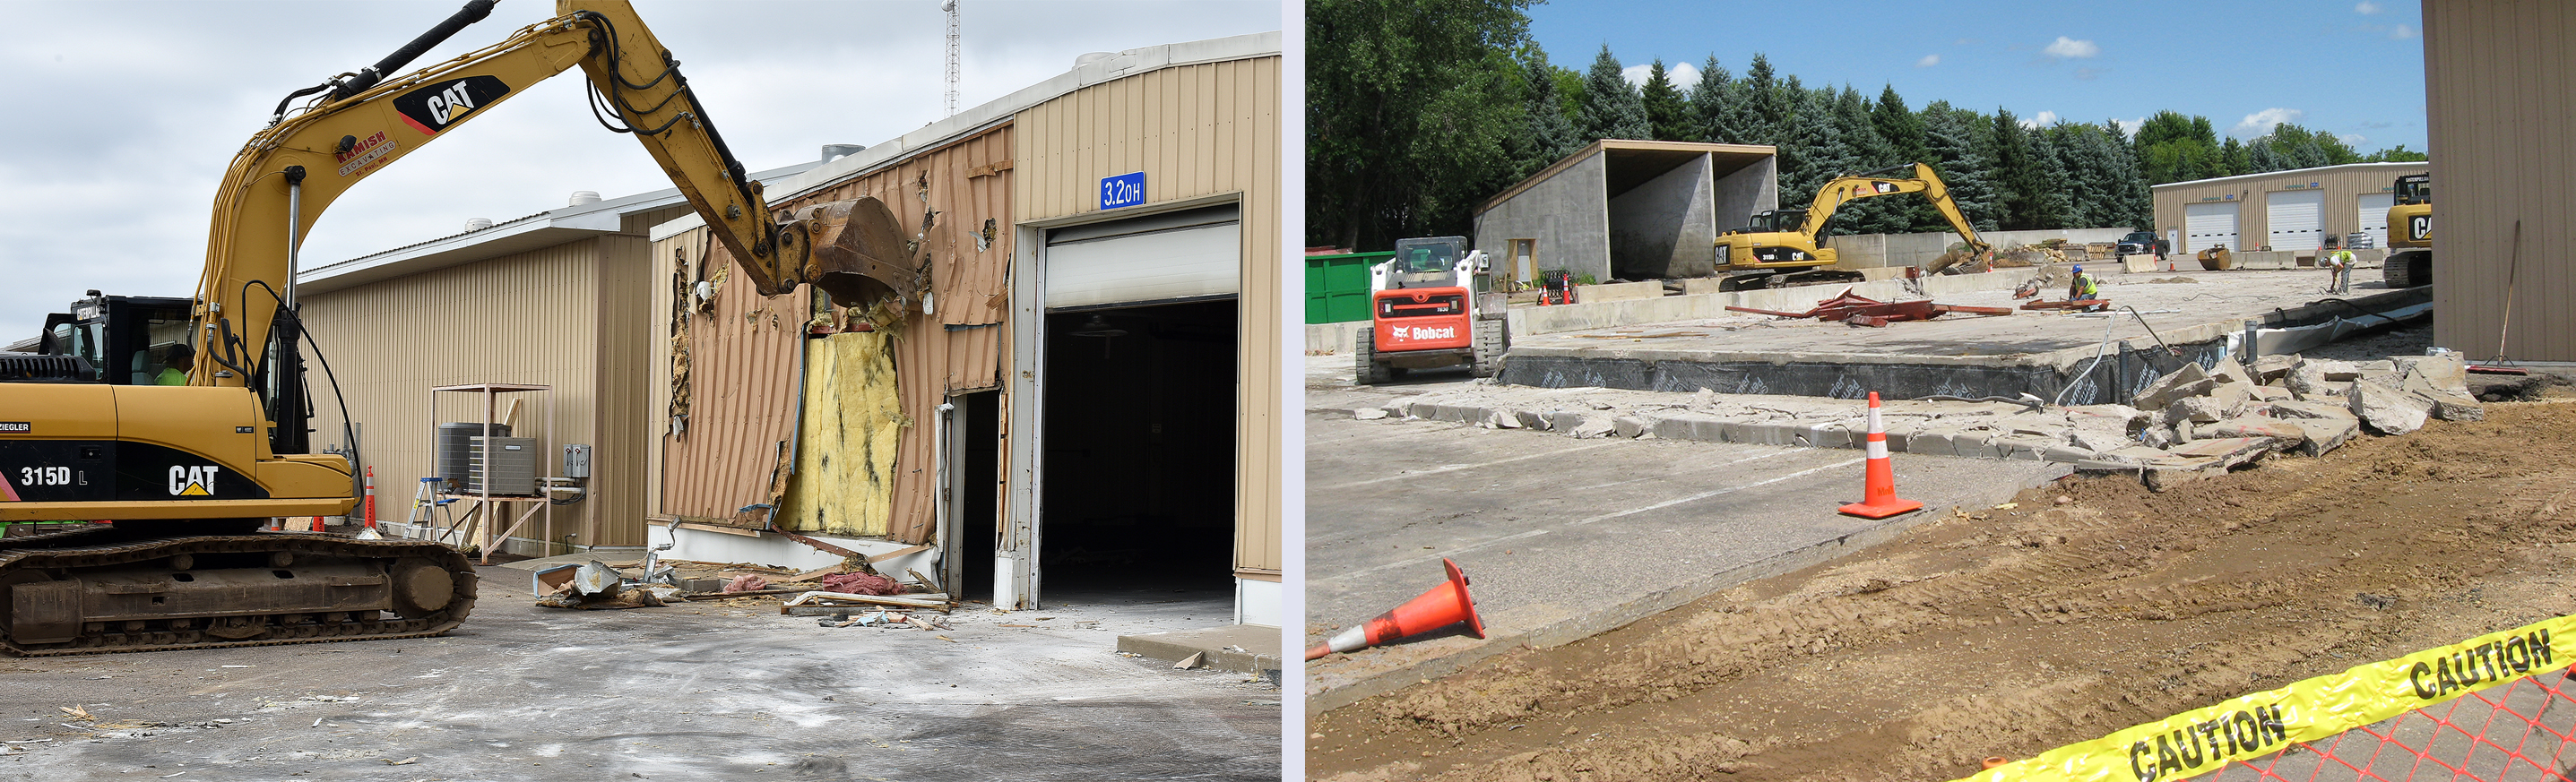 Two pictures - the one on the left shows an excavator beginning the process of tearing the old sign shop building down, and the one on the right shows the empty site after the demolition was complete